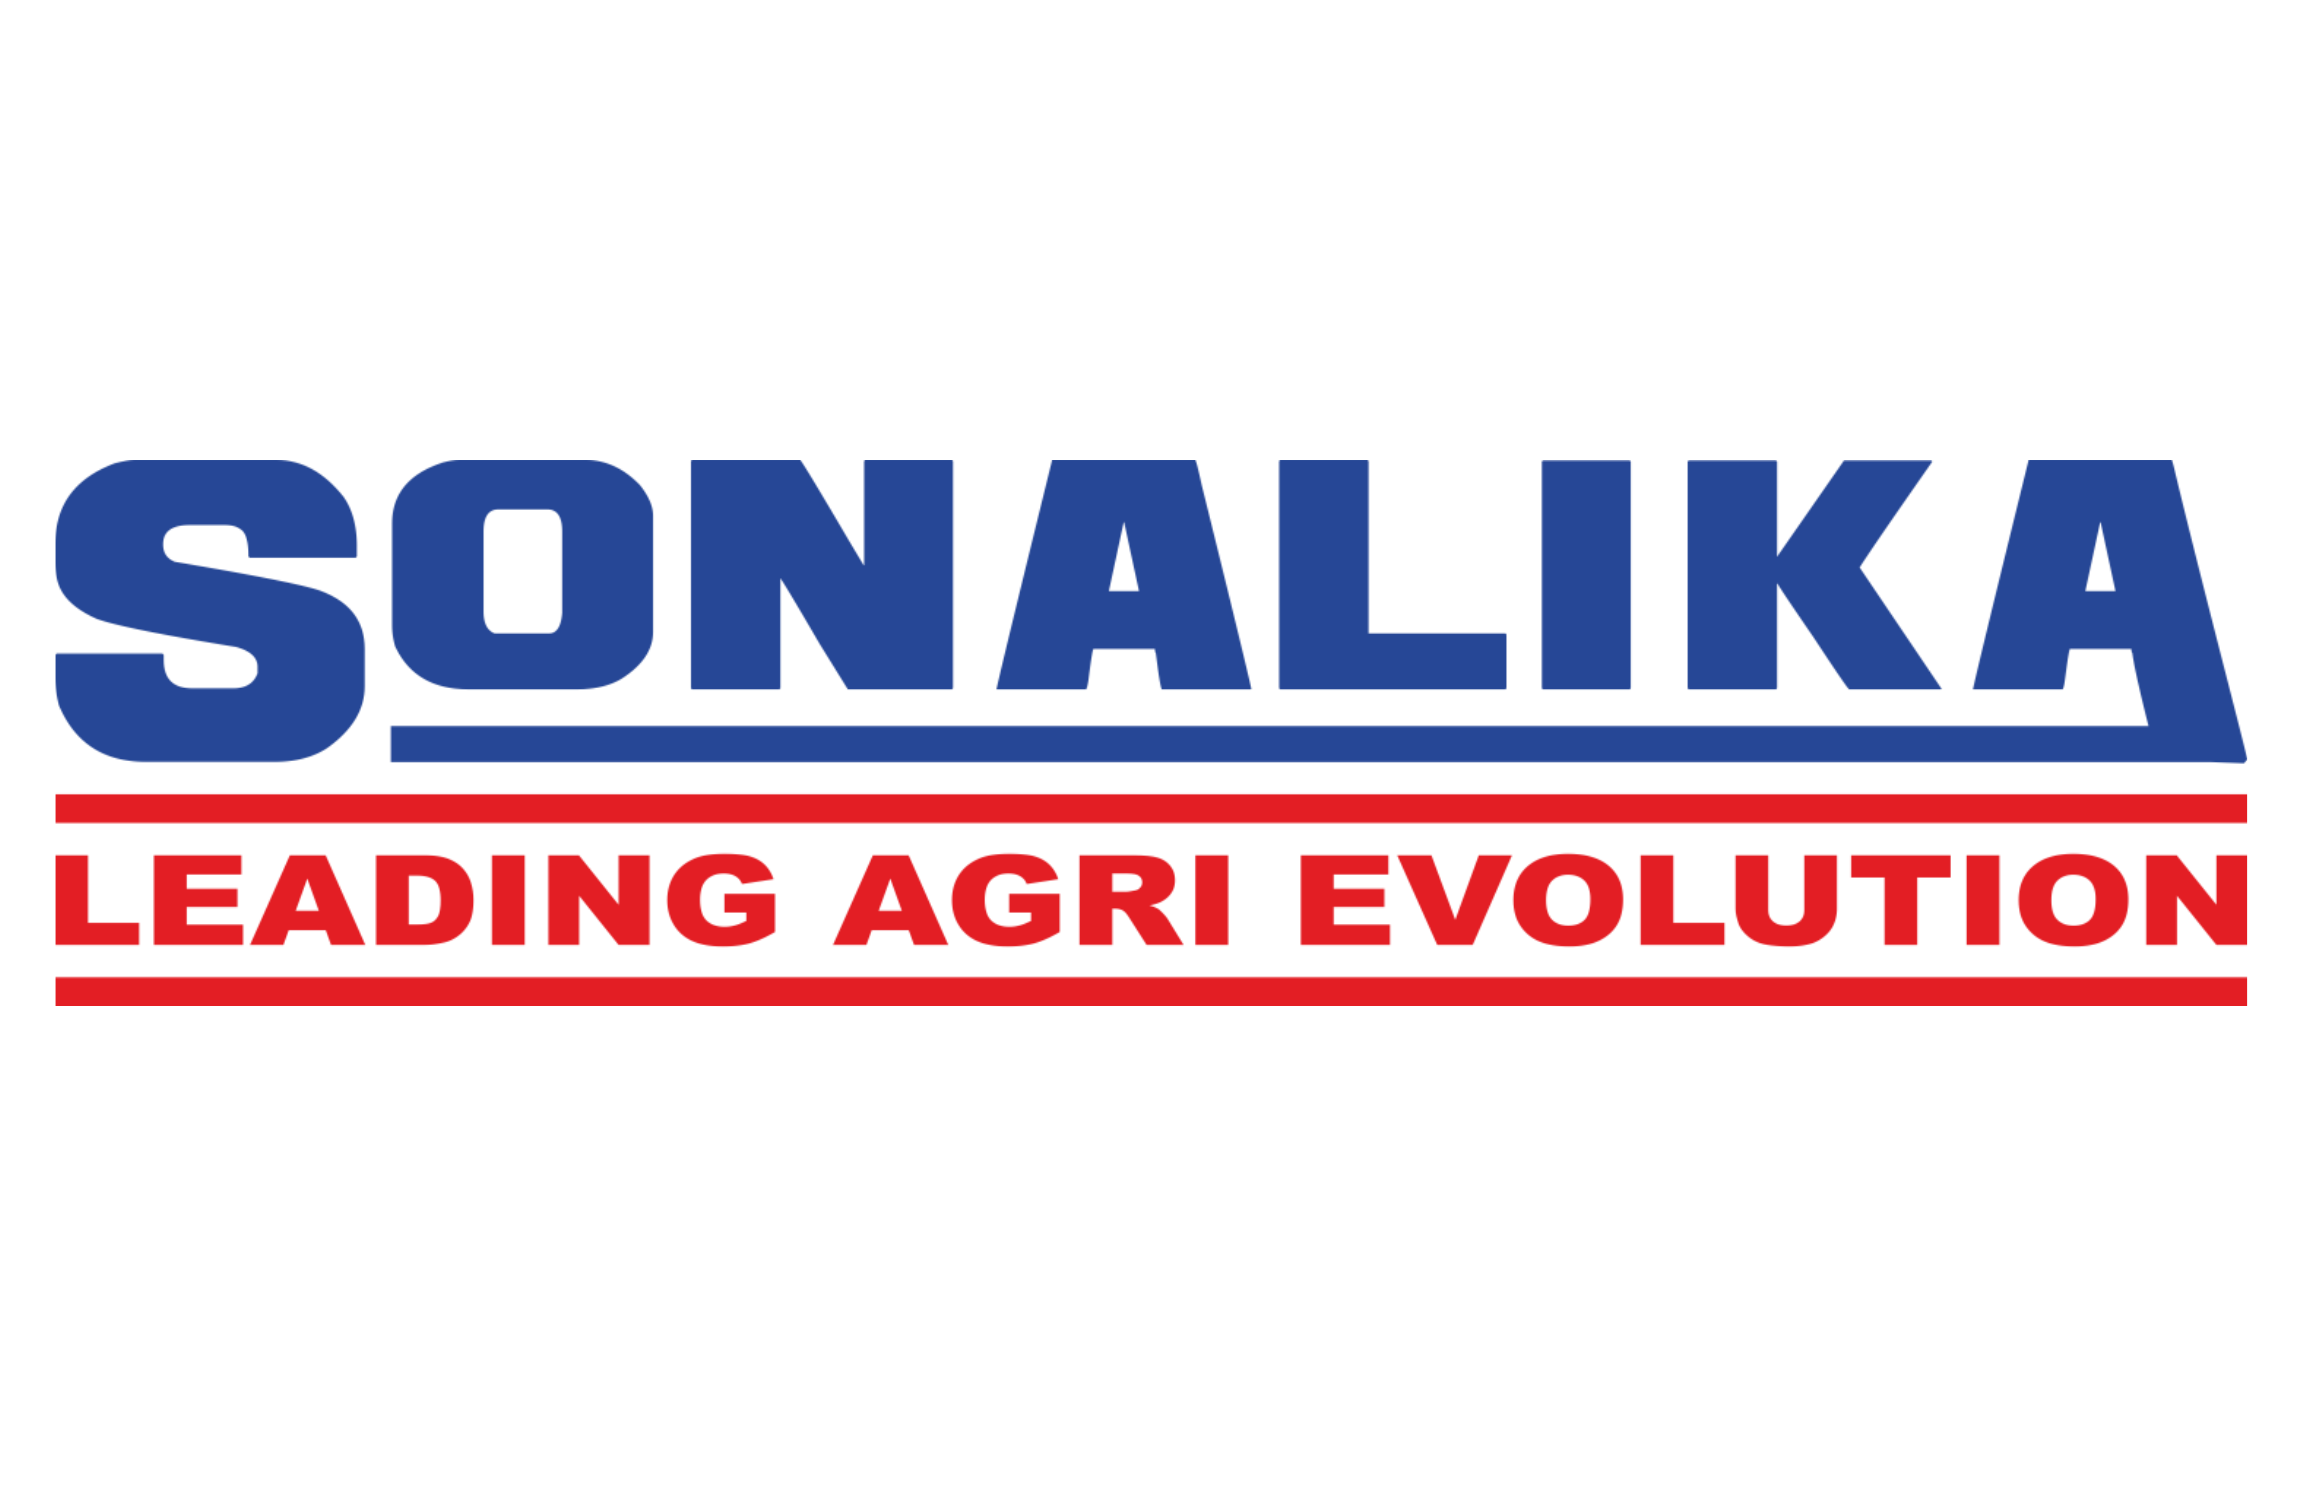 Sonalika Tractor Sales Growth Reported At 71 Percent For November 2020